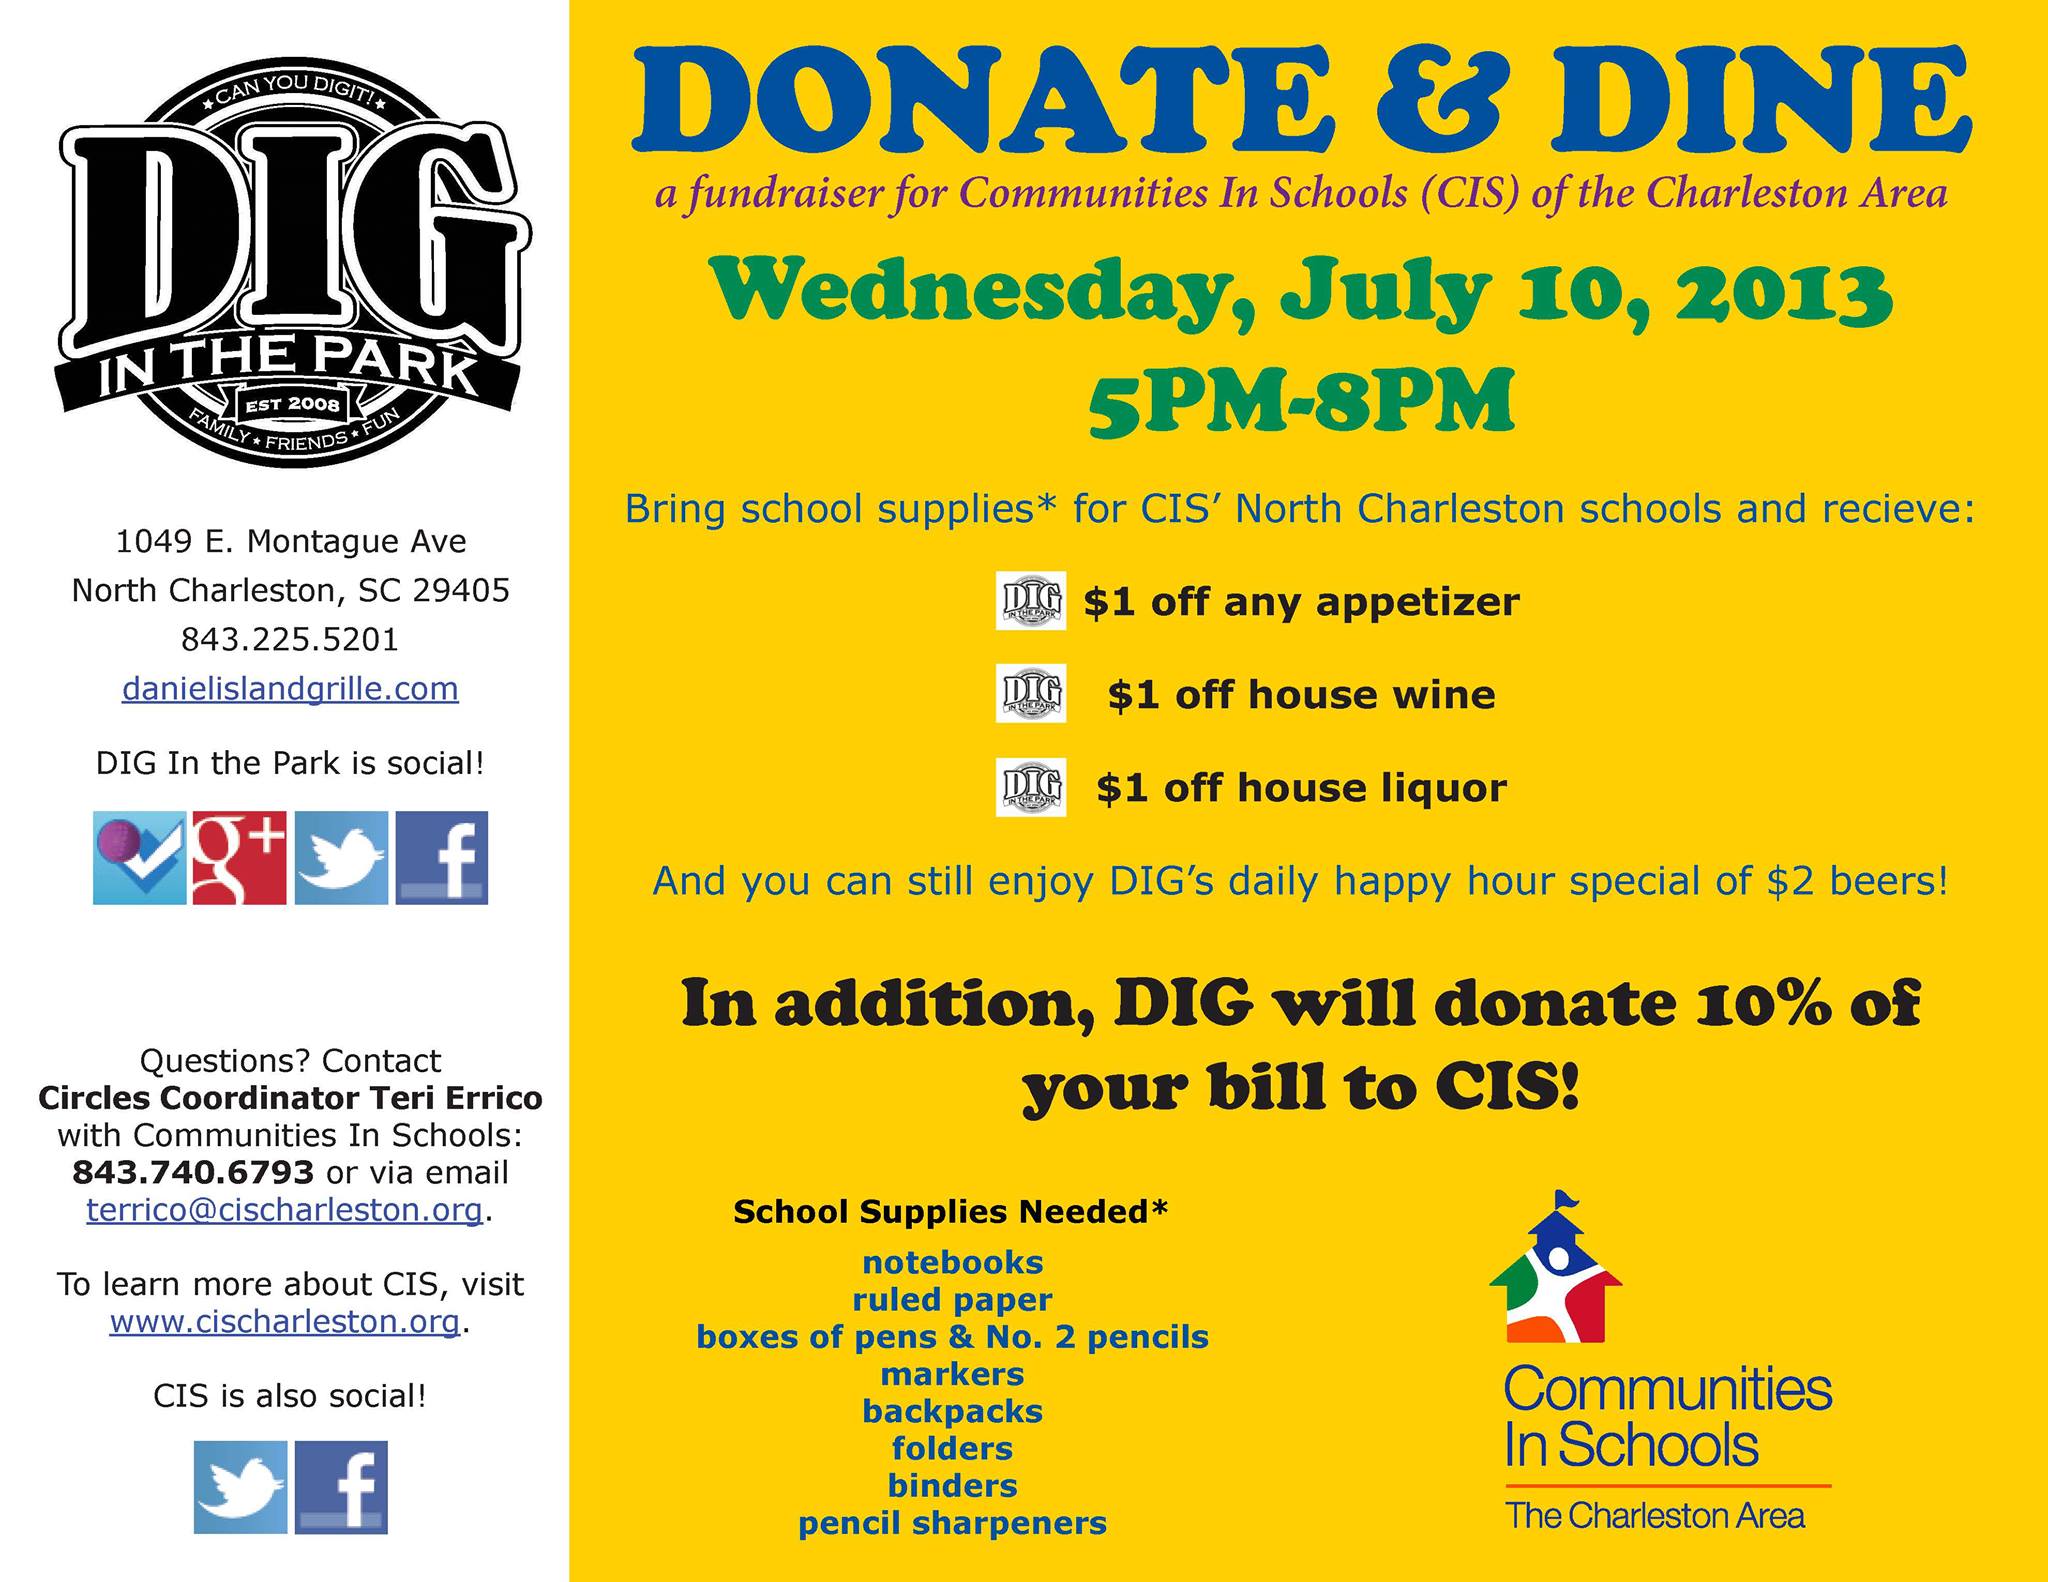 Donate & Dine @ Dig in the Park - Real Deal with Neil